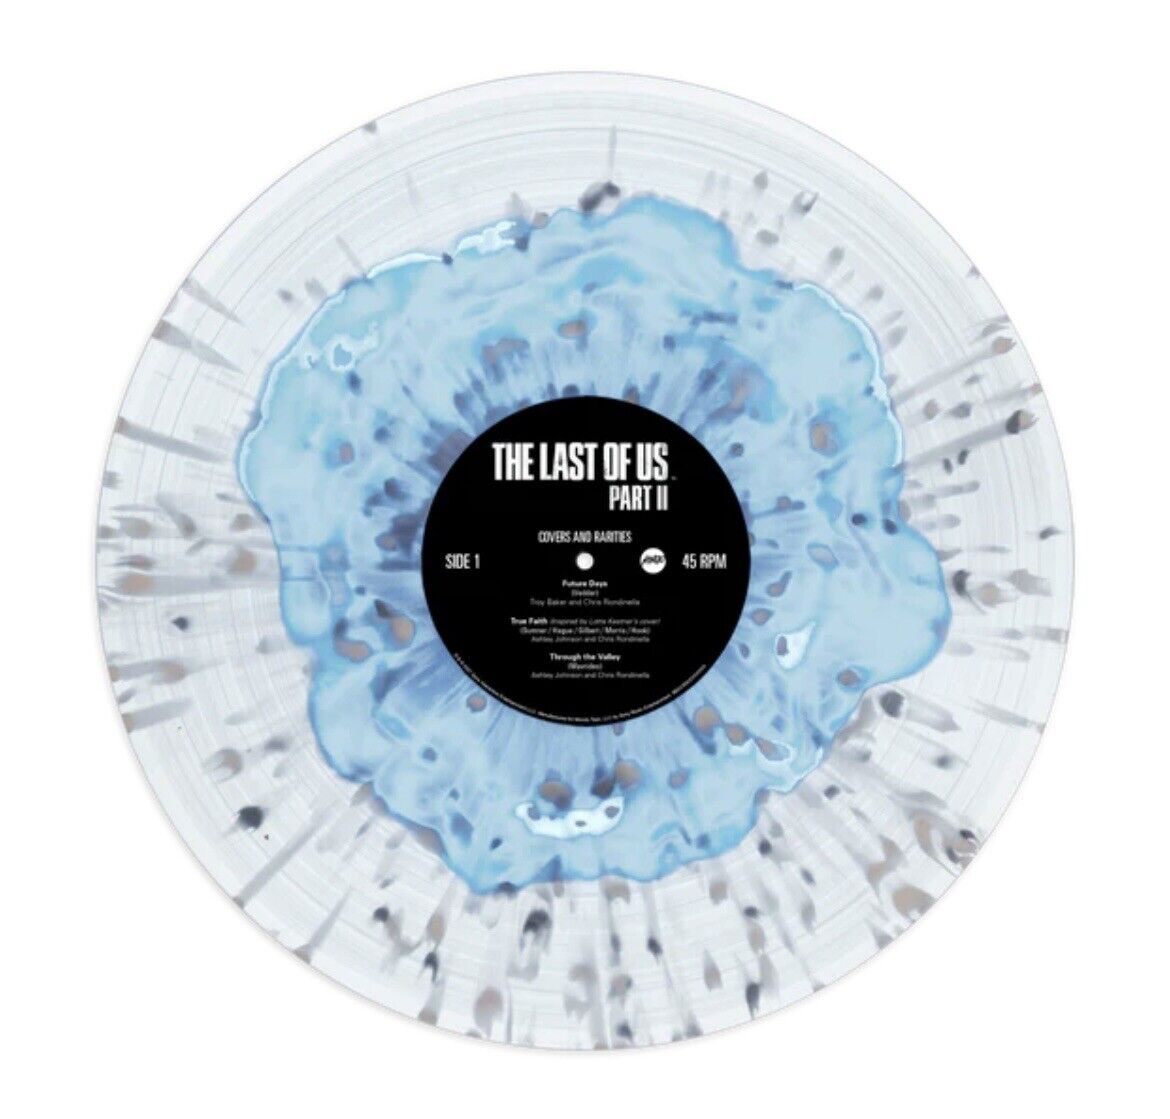 The Last of Us Part II 2 Covers and Rarities 180g Record EP Mondo Color Vinyl